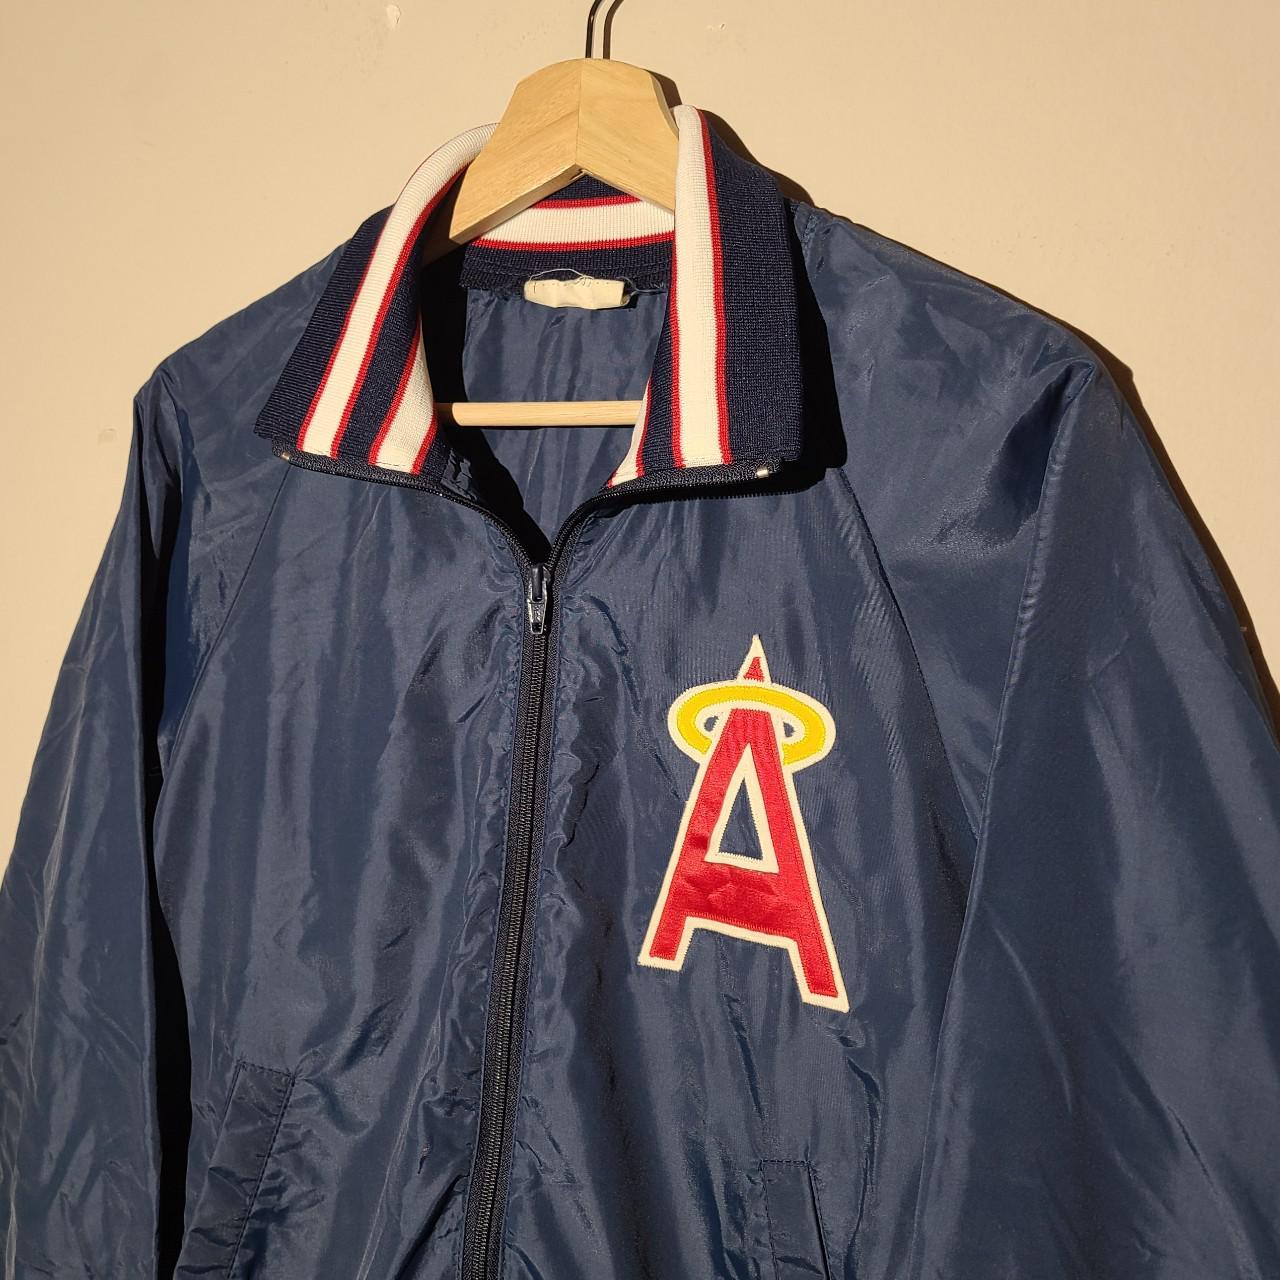 Vintage 80s Angels Jacket Made in USA. Features - Depop